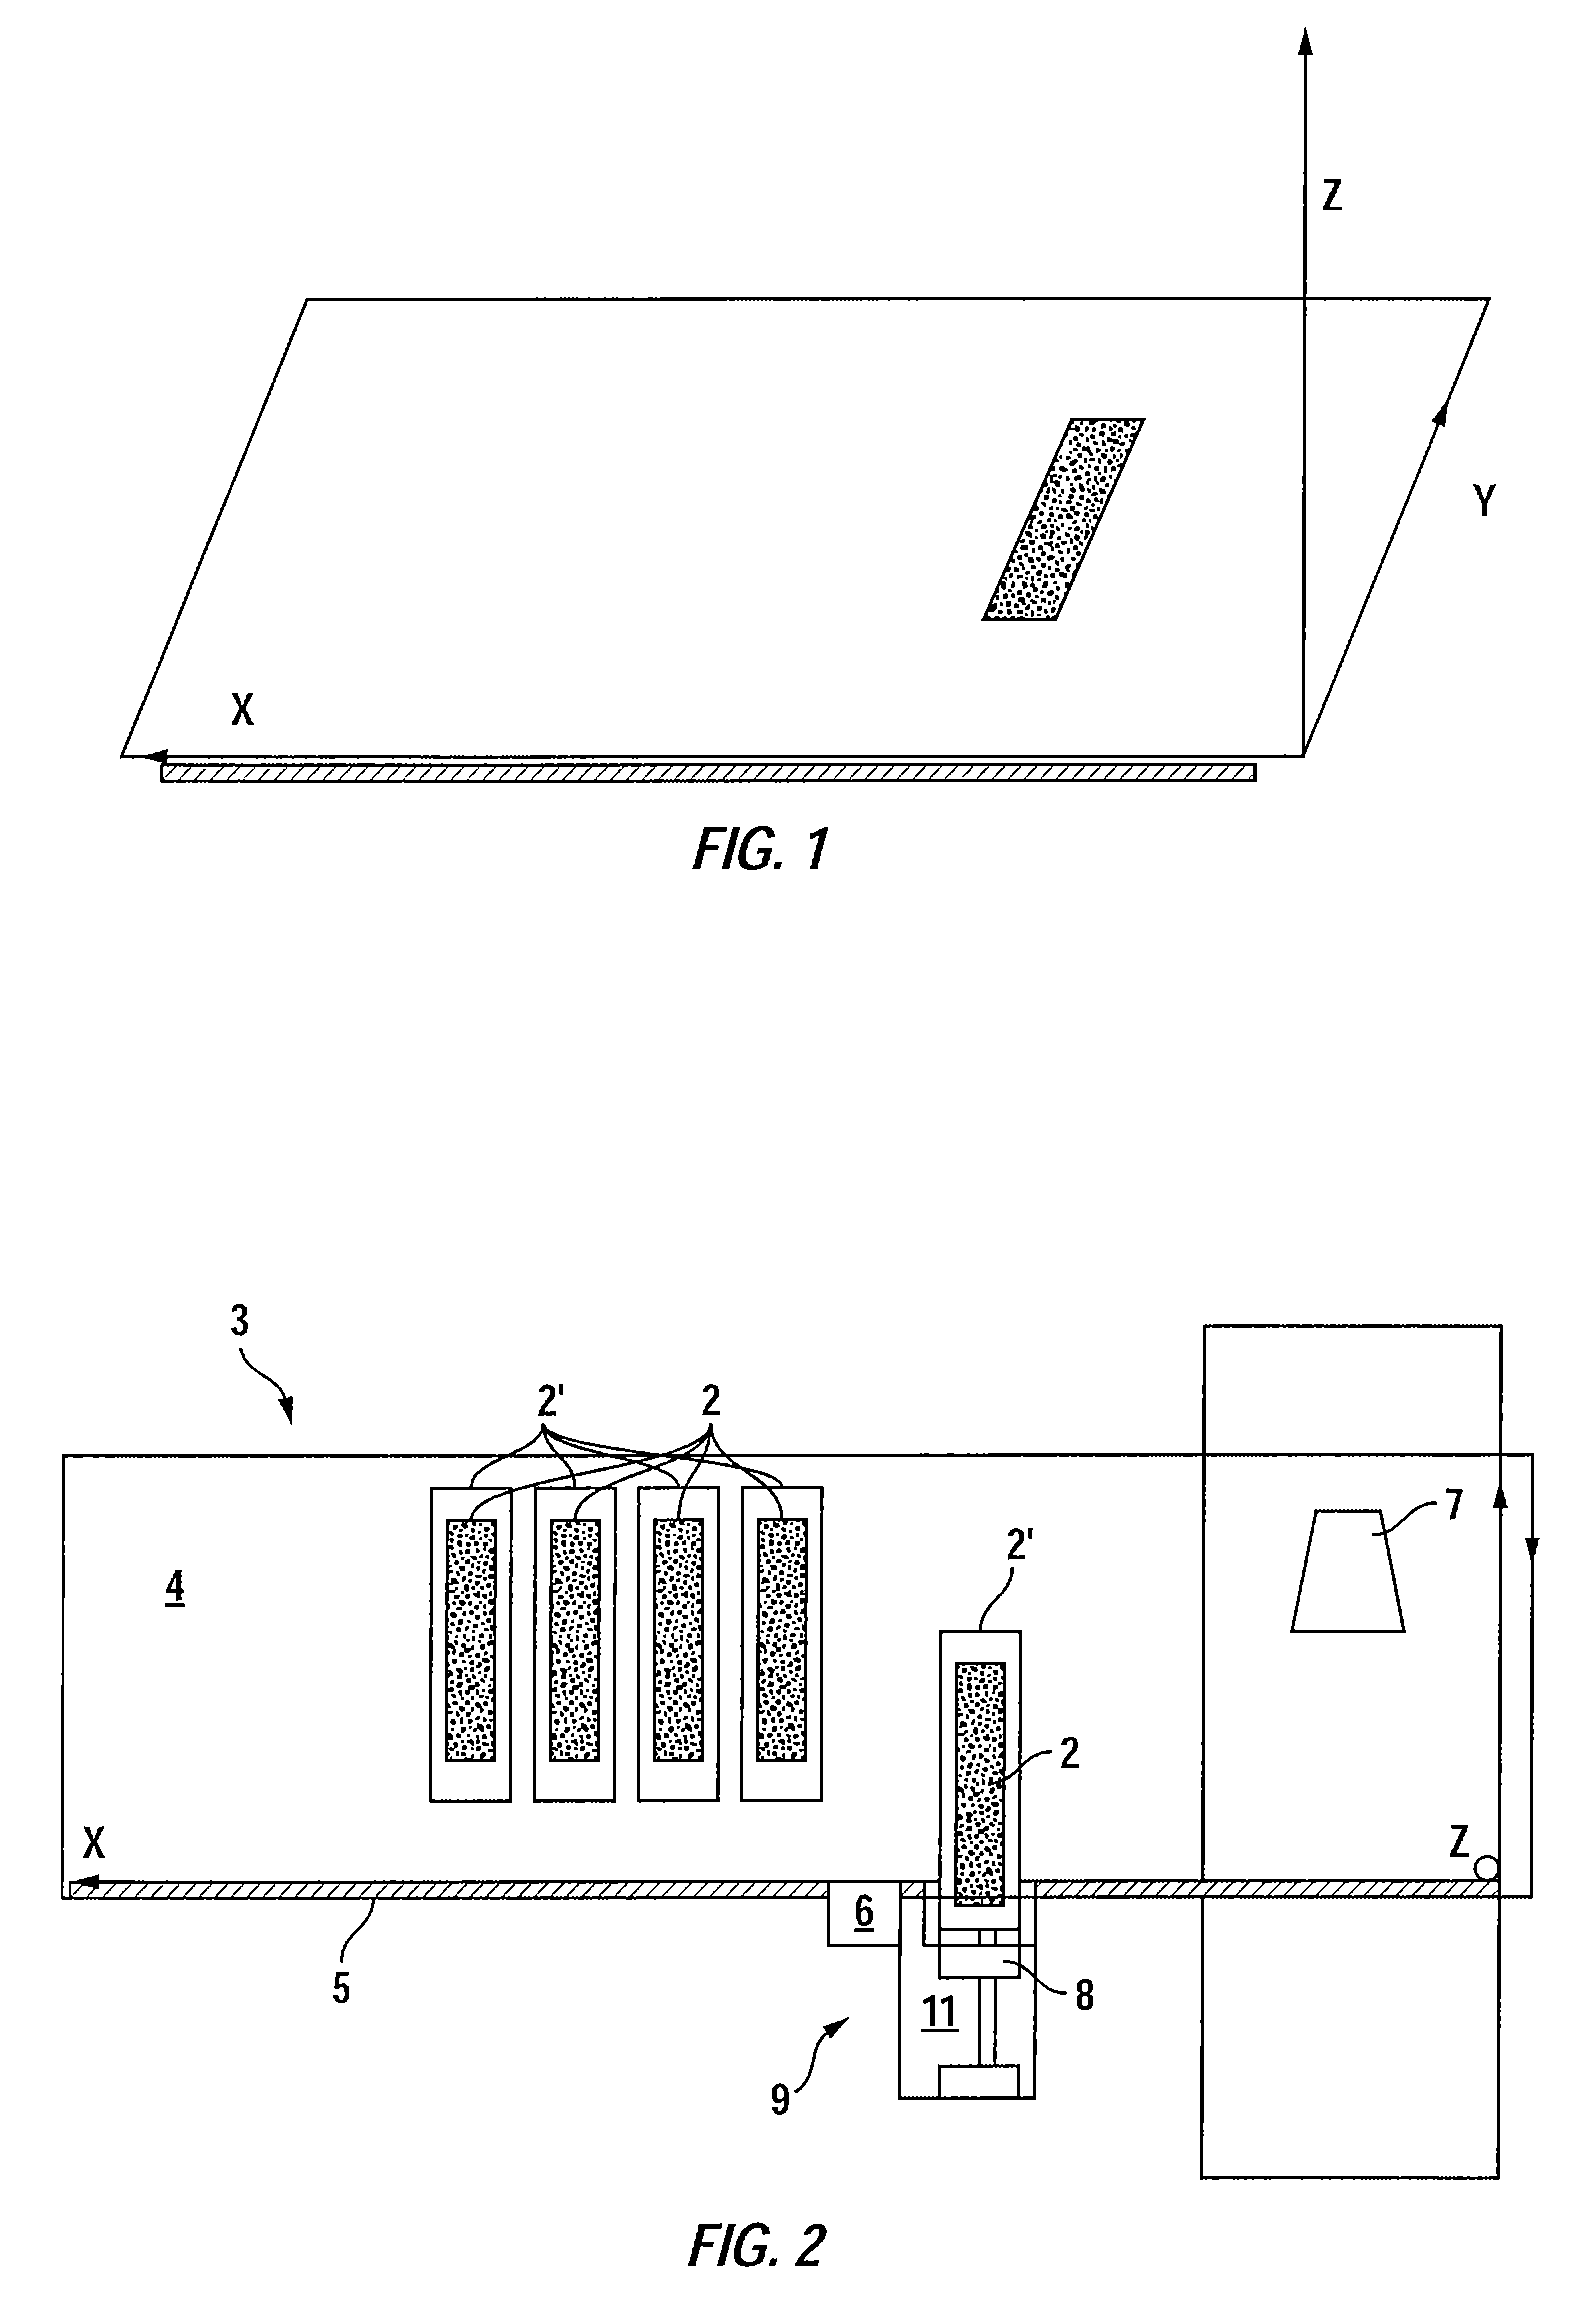 Apparatus for high throughput sequencing of nucleic acids